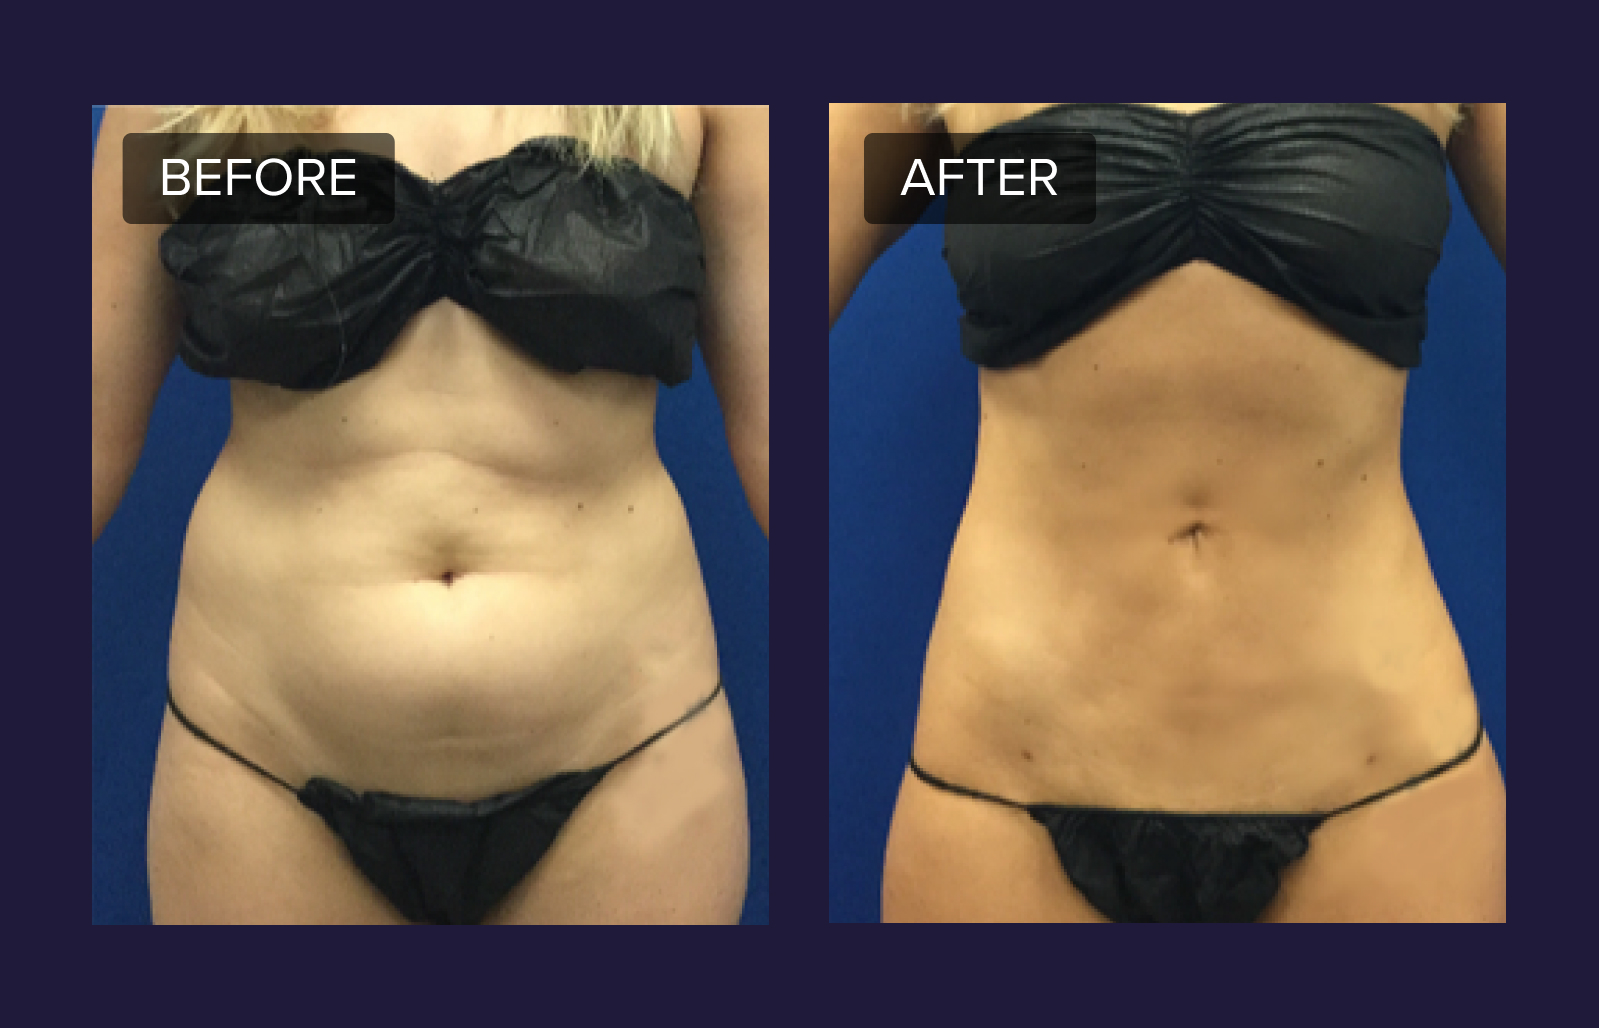 Laser Liposuction: What Is It? How Does It Work? Is Safe? [FAQ]